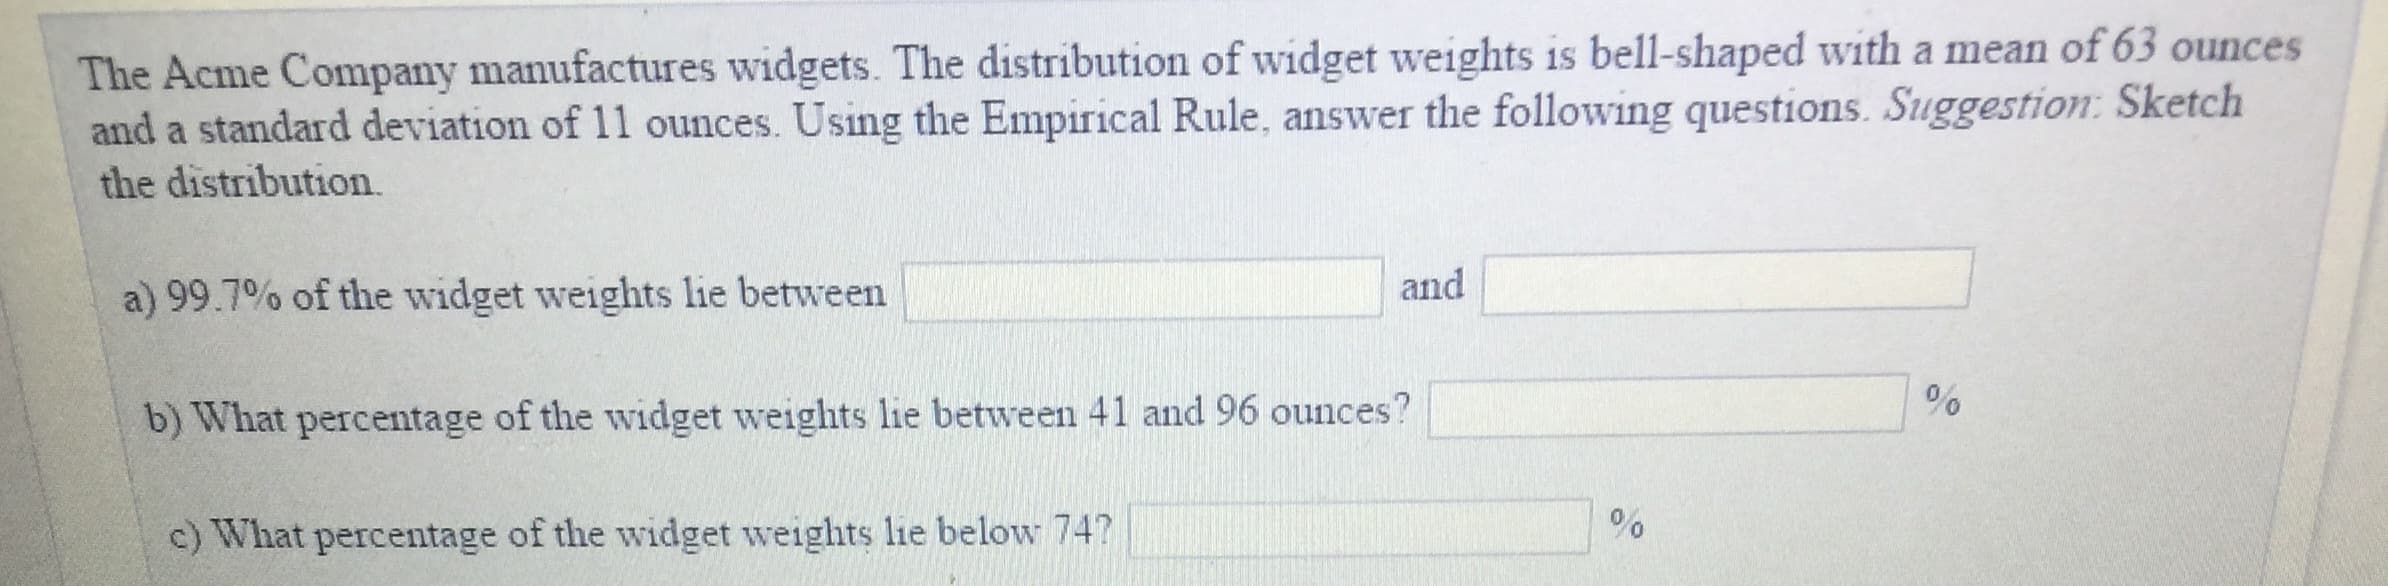 The Acme Company manufactures widgets. The distribution of widget weights is bell-shaped with a mean of 63 ounces
and a standard deviation of 11 ounces. Using the Empirical Rule, answer the following questions. Suggestion: Sketch
the distribution.
a) 99.7% of the widget weights lie between 1
and
b) What percentage of the widget weights lie between 41 and 96 ounces?
c) What percentage of the widget weights lie below 74?
